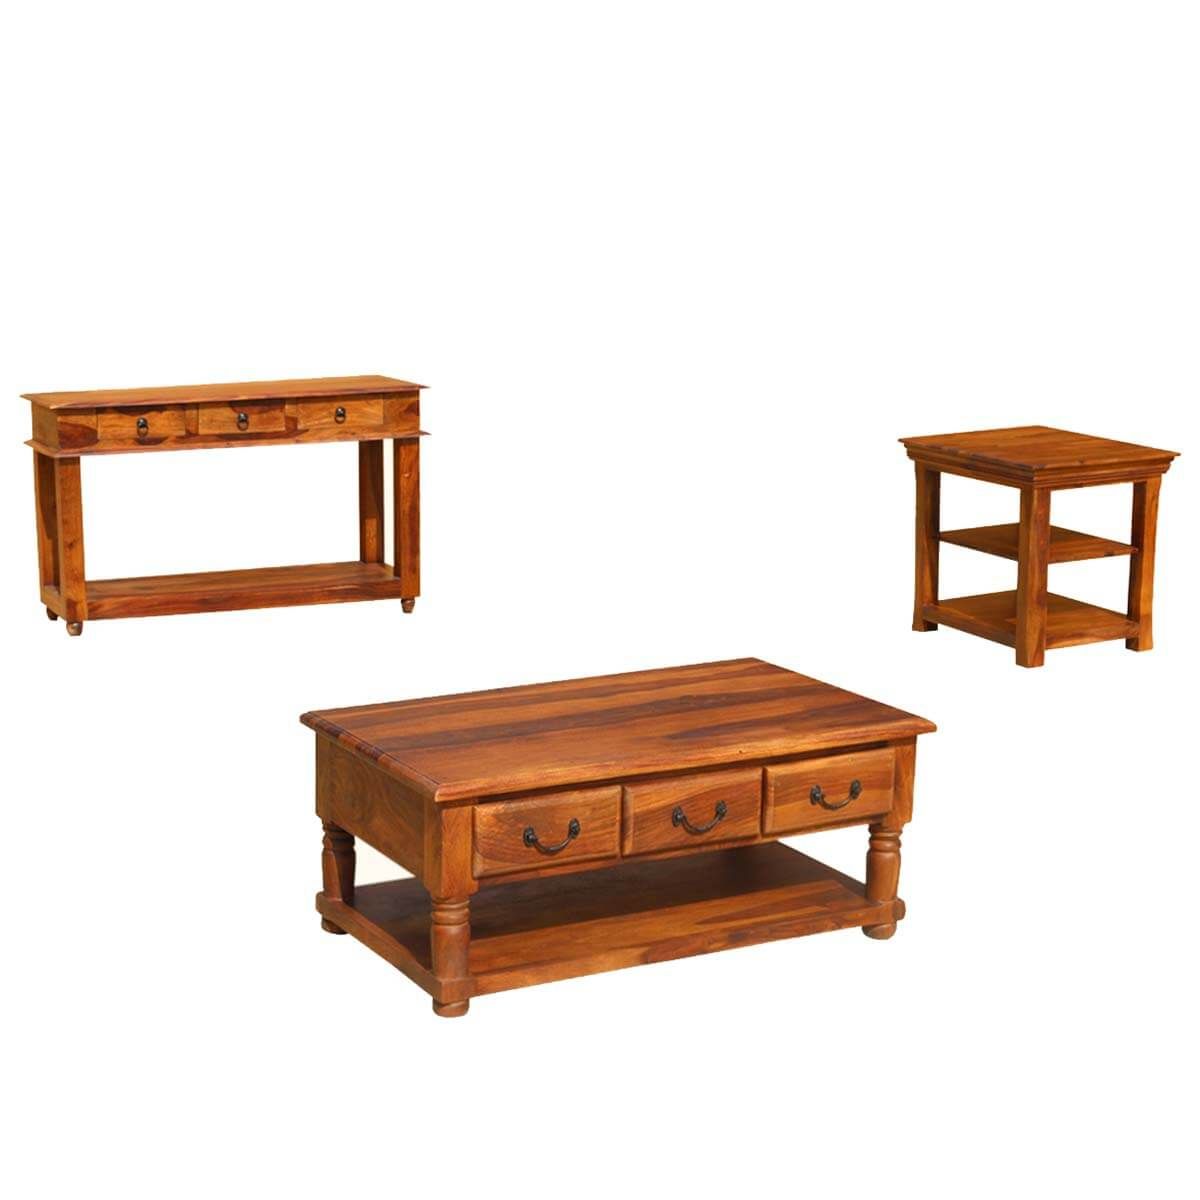 Early American Solid Wood Console Coffee & Accent Table With Regard To Rustic Espresso Wood Console Tables (Photo 14 of 20)